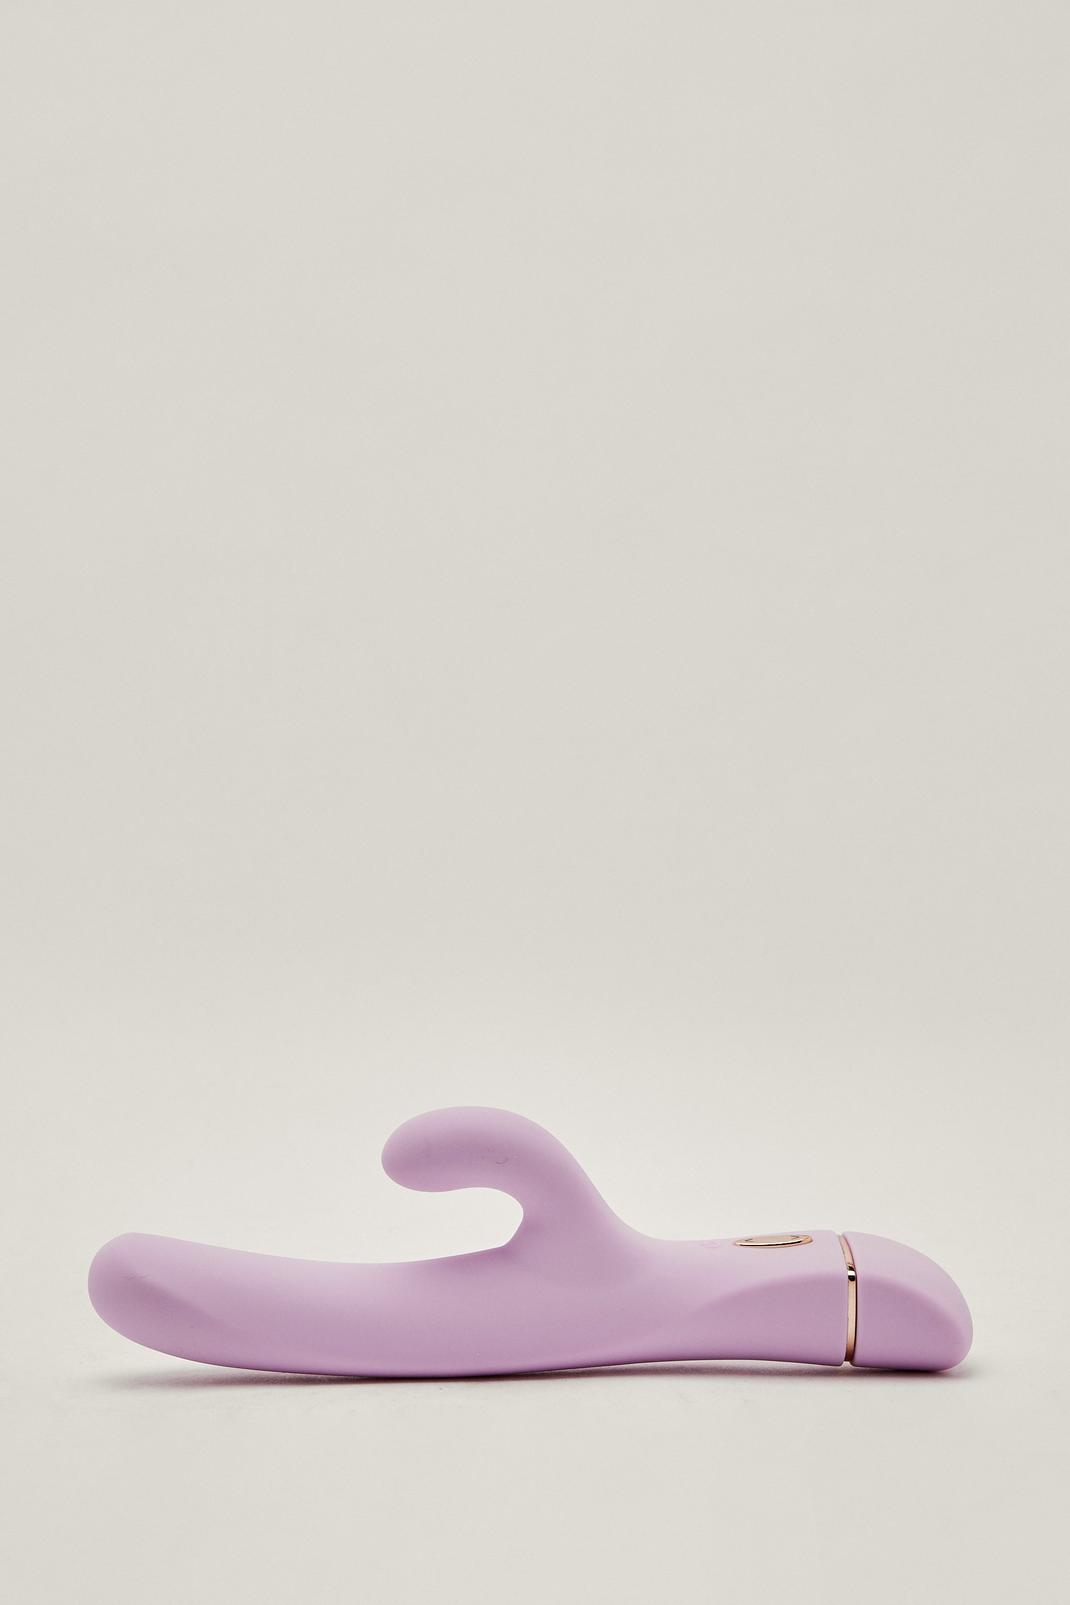 Silicone Rabbit G-Spot Vibrator, Lilac image number 1